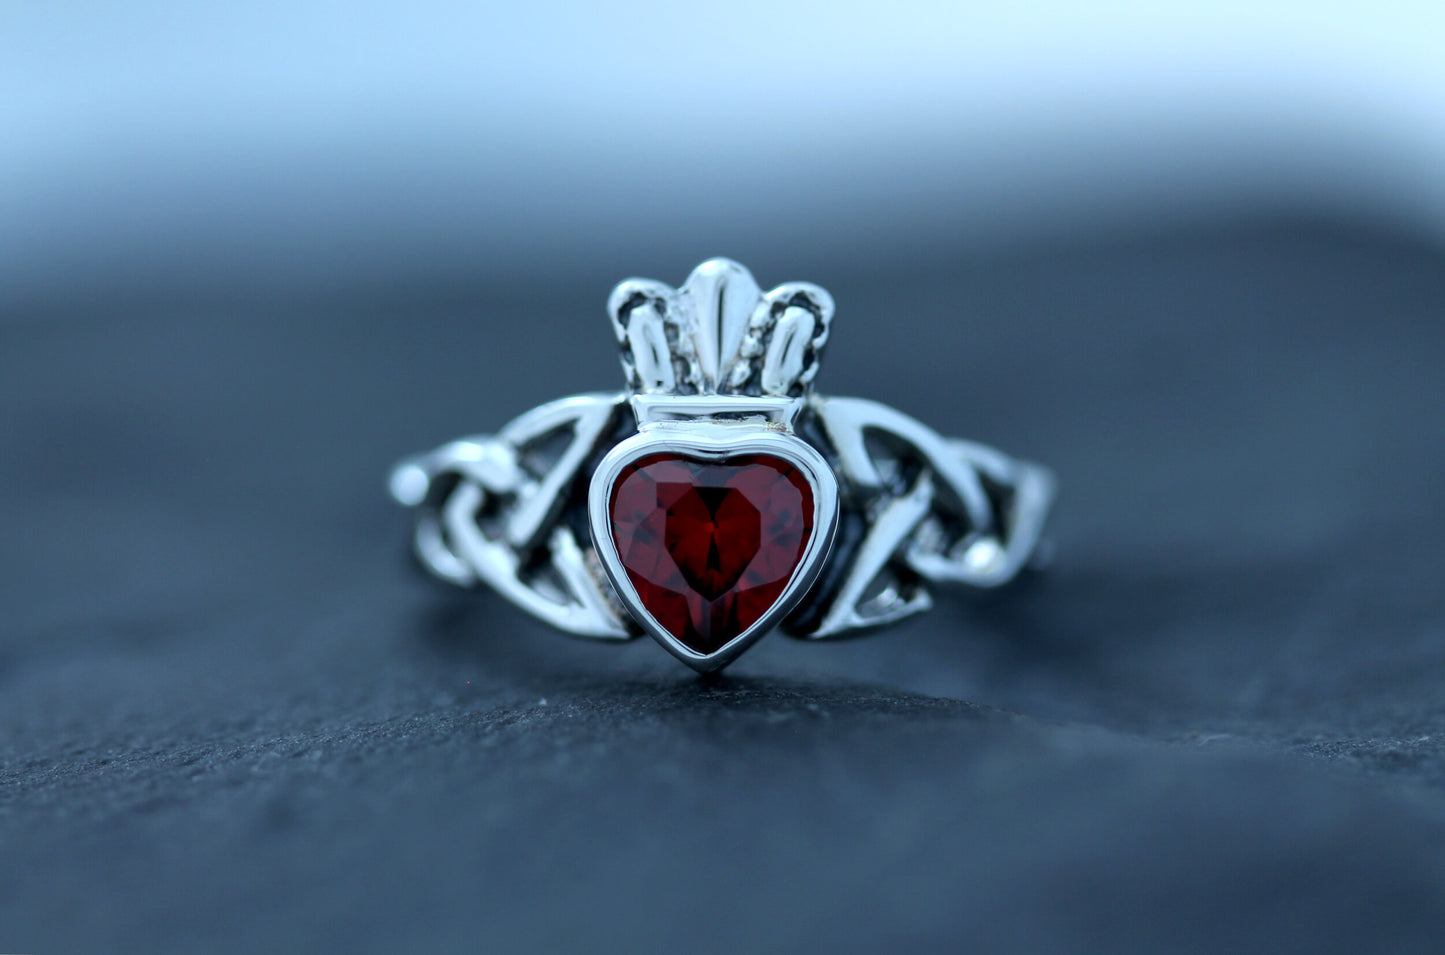 Claddagh Ring - Trinity Knot with Royal Crown with Red Zircon